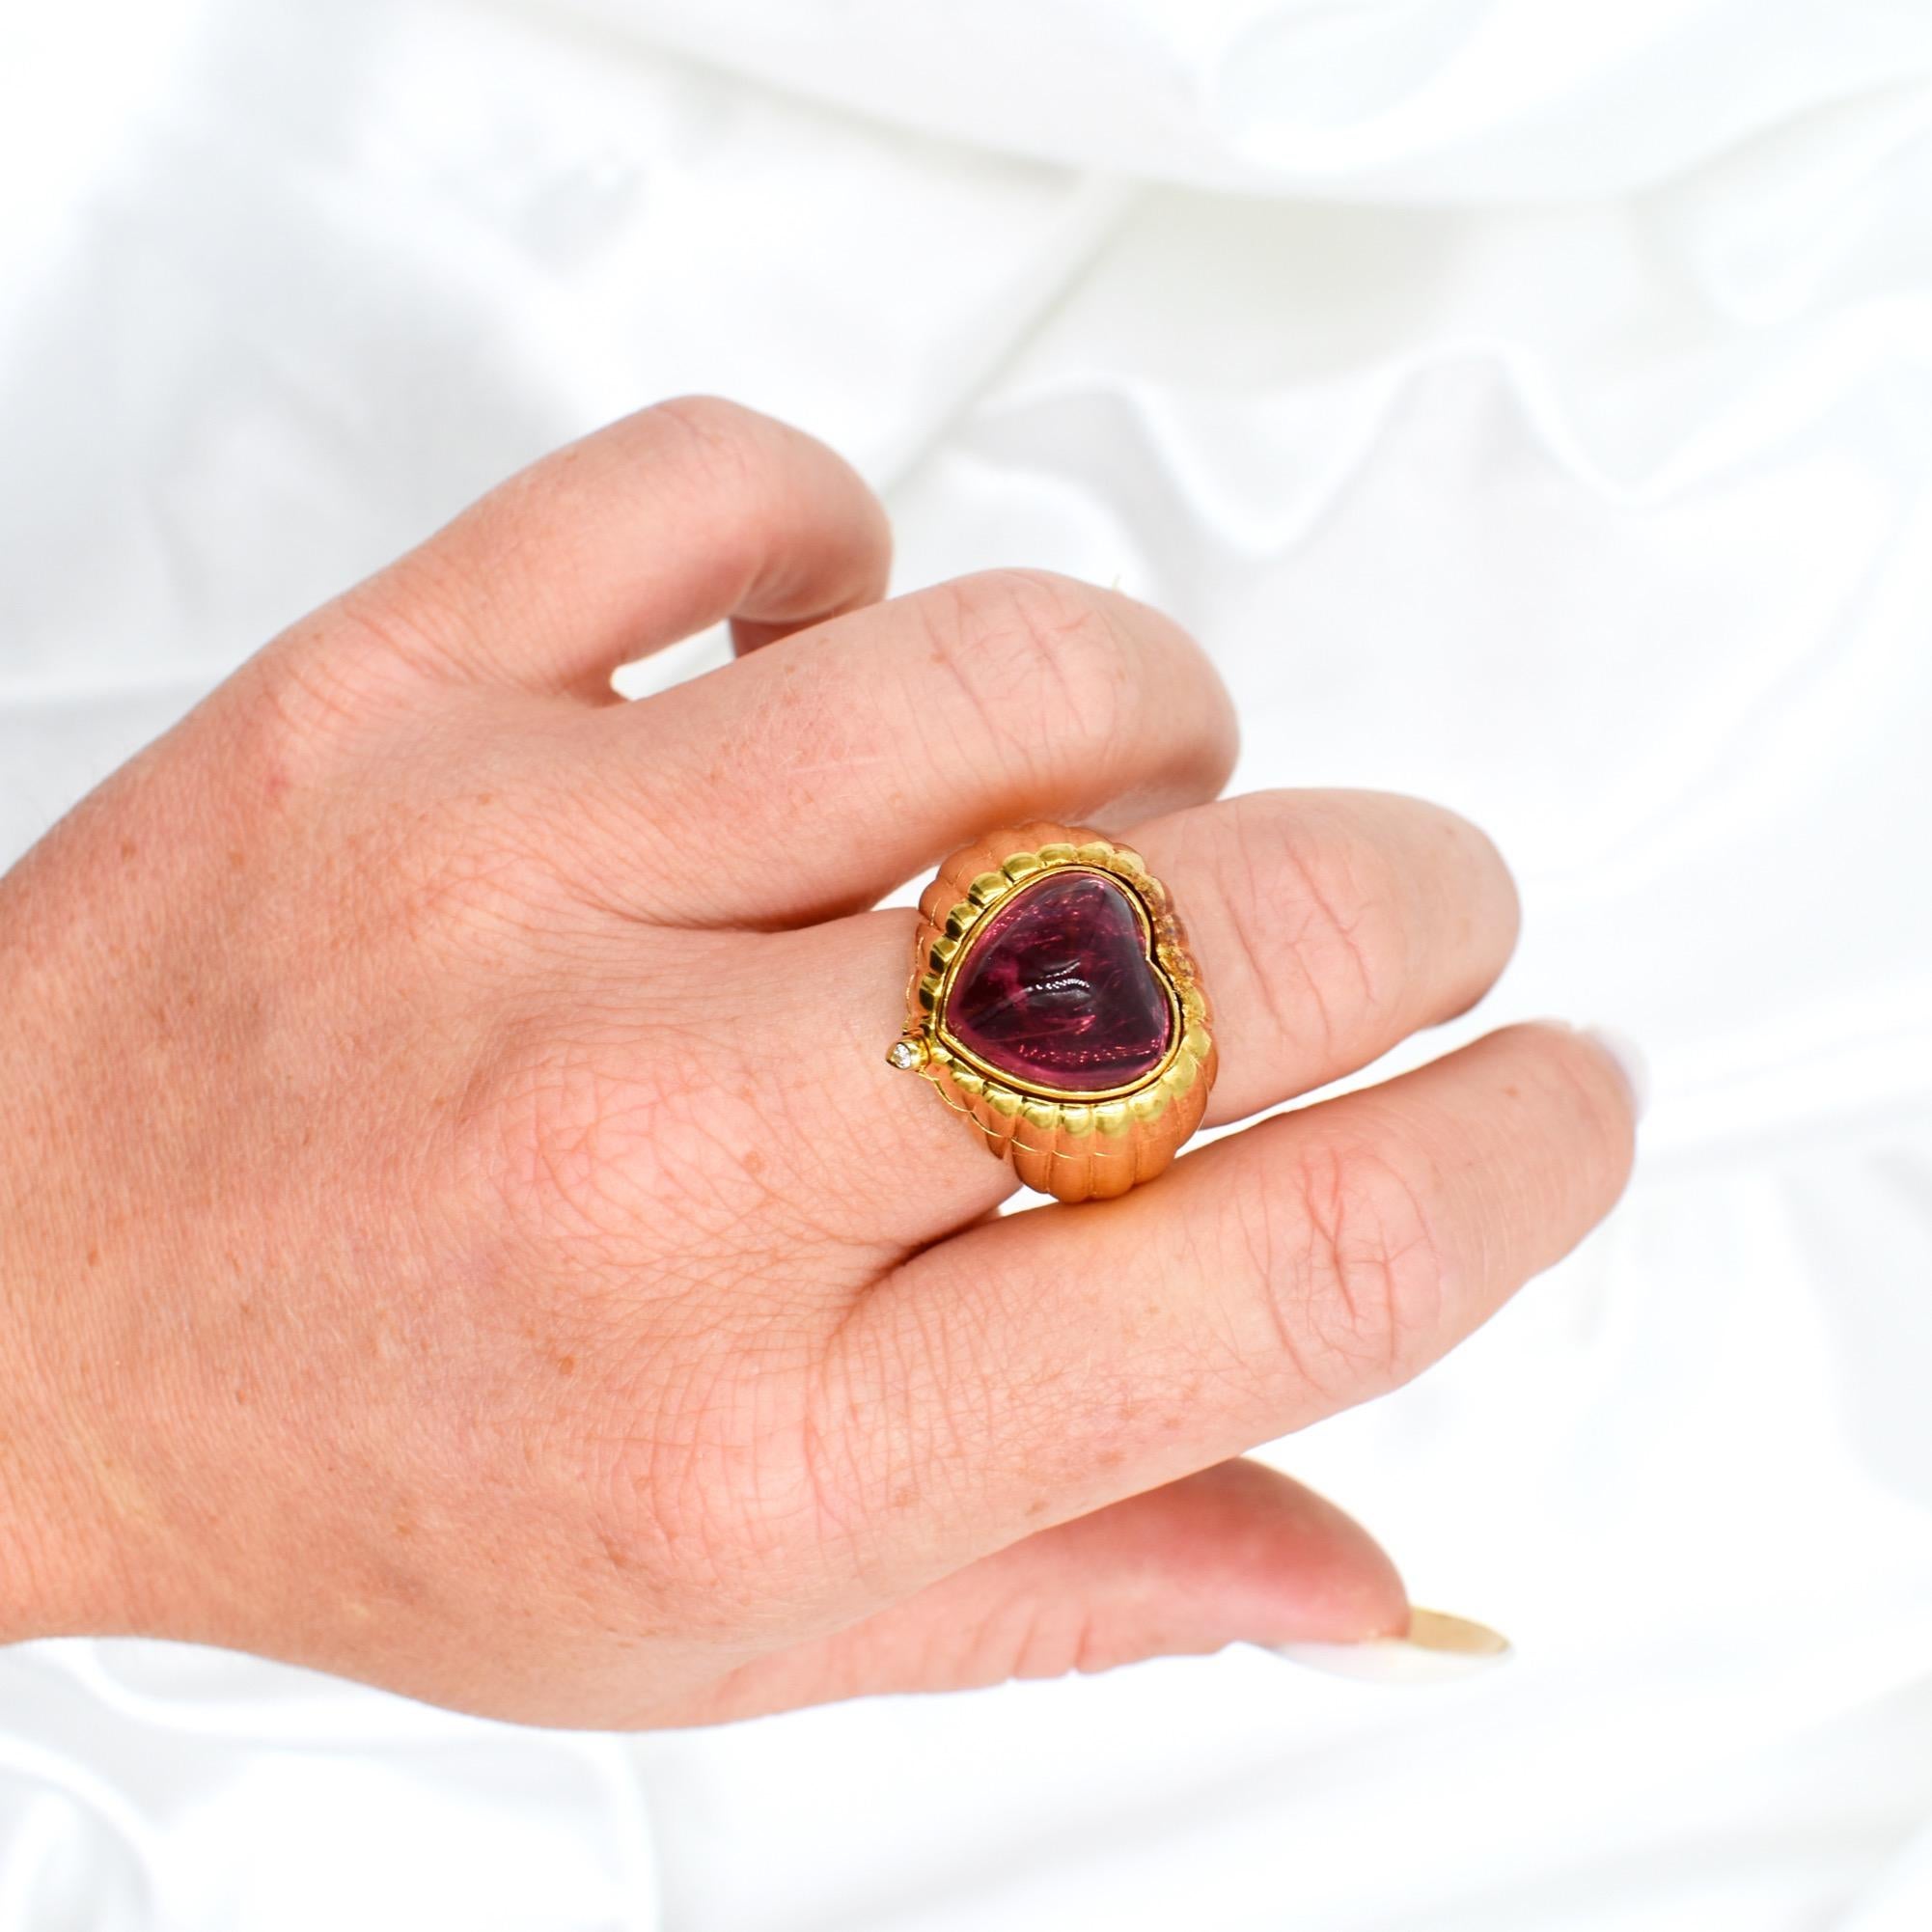 Modular 3-in-1 Heart Ring in Gold with Amethyst, Citrine, Tourmaline Cabochons For Sale 5